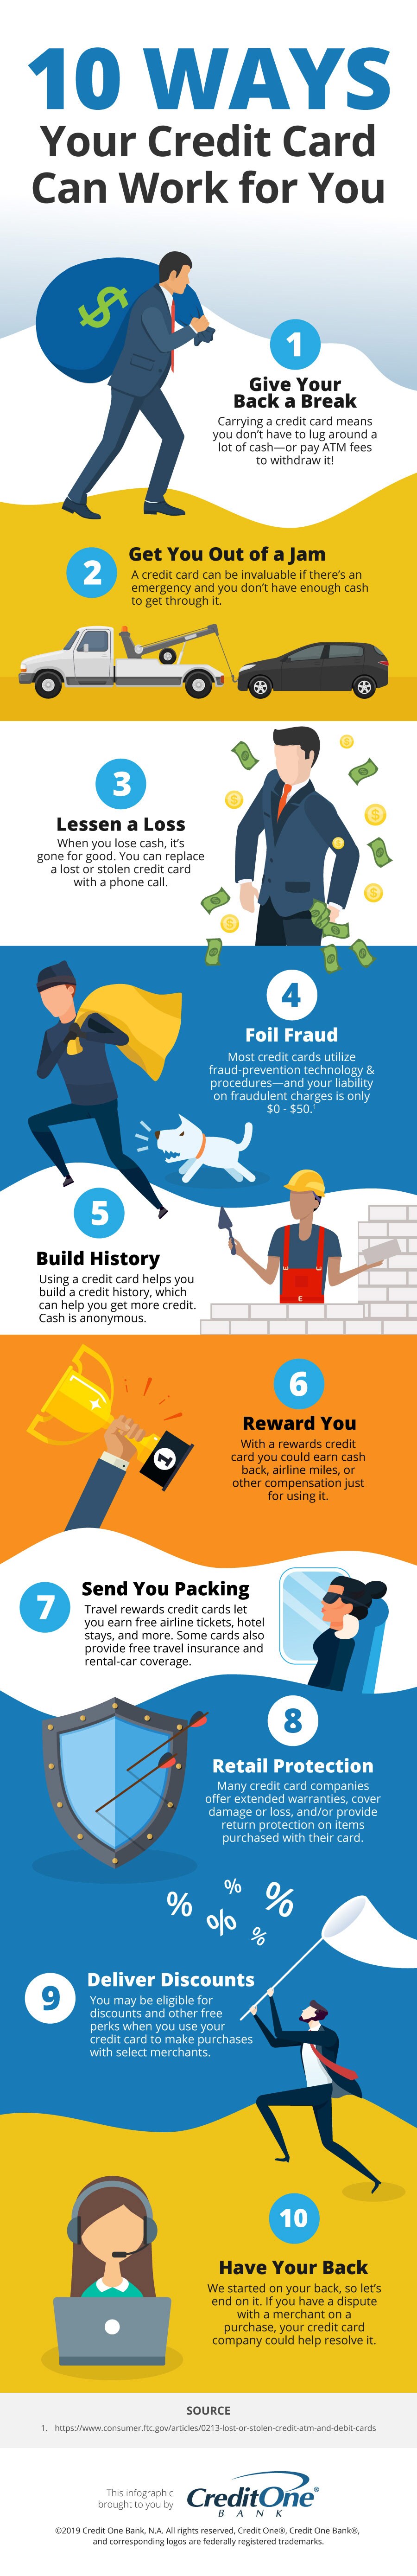 How Credit Cards Work for You [Infographic]